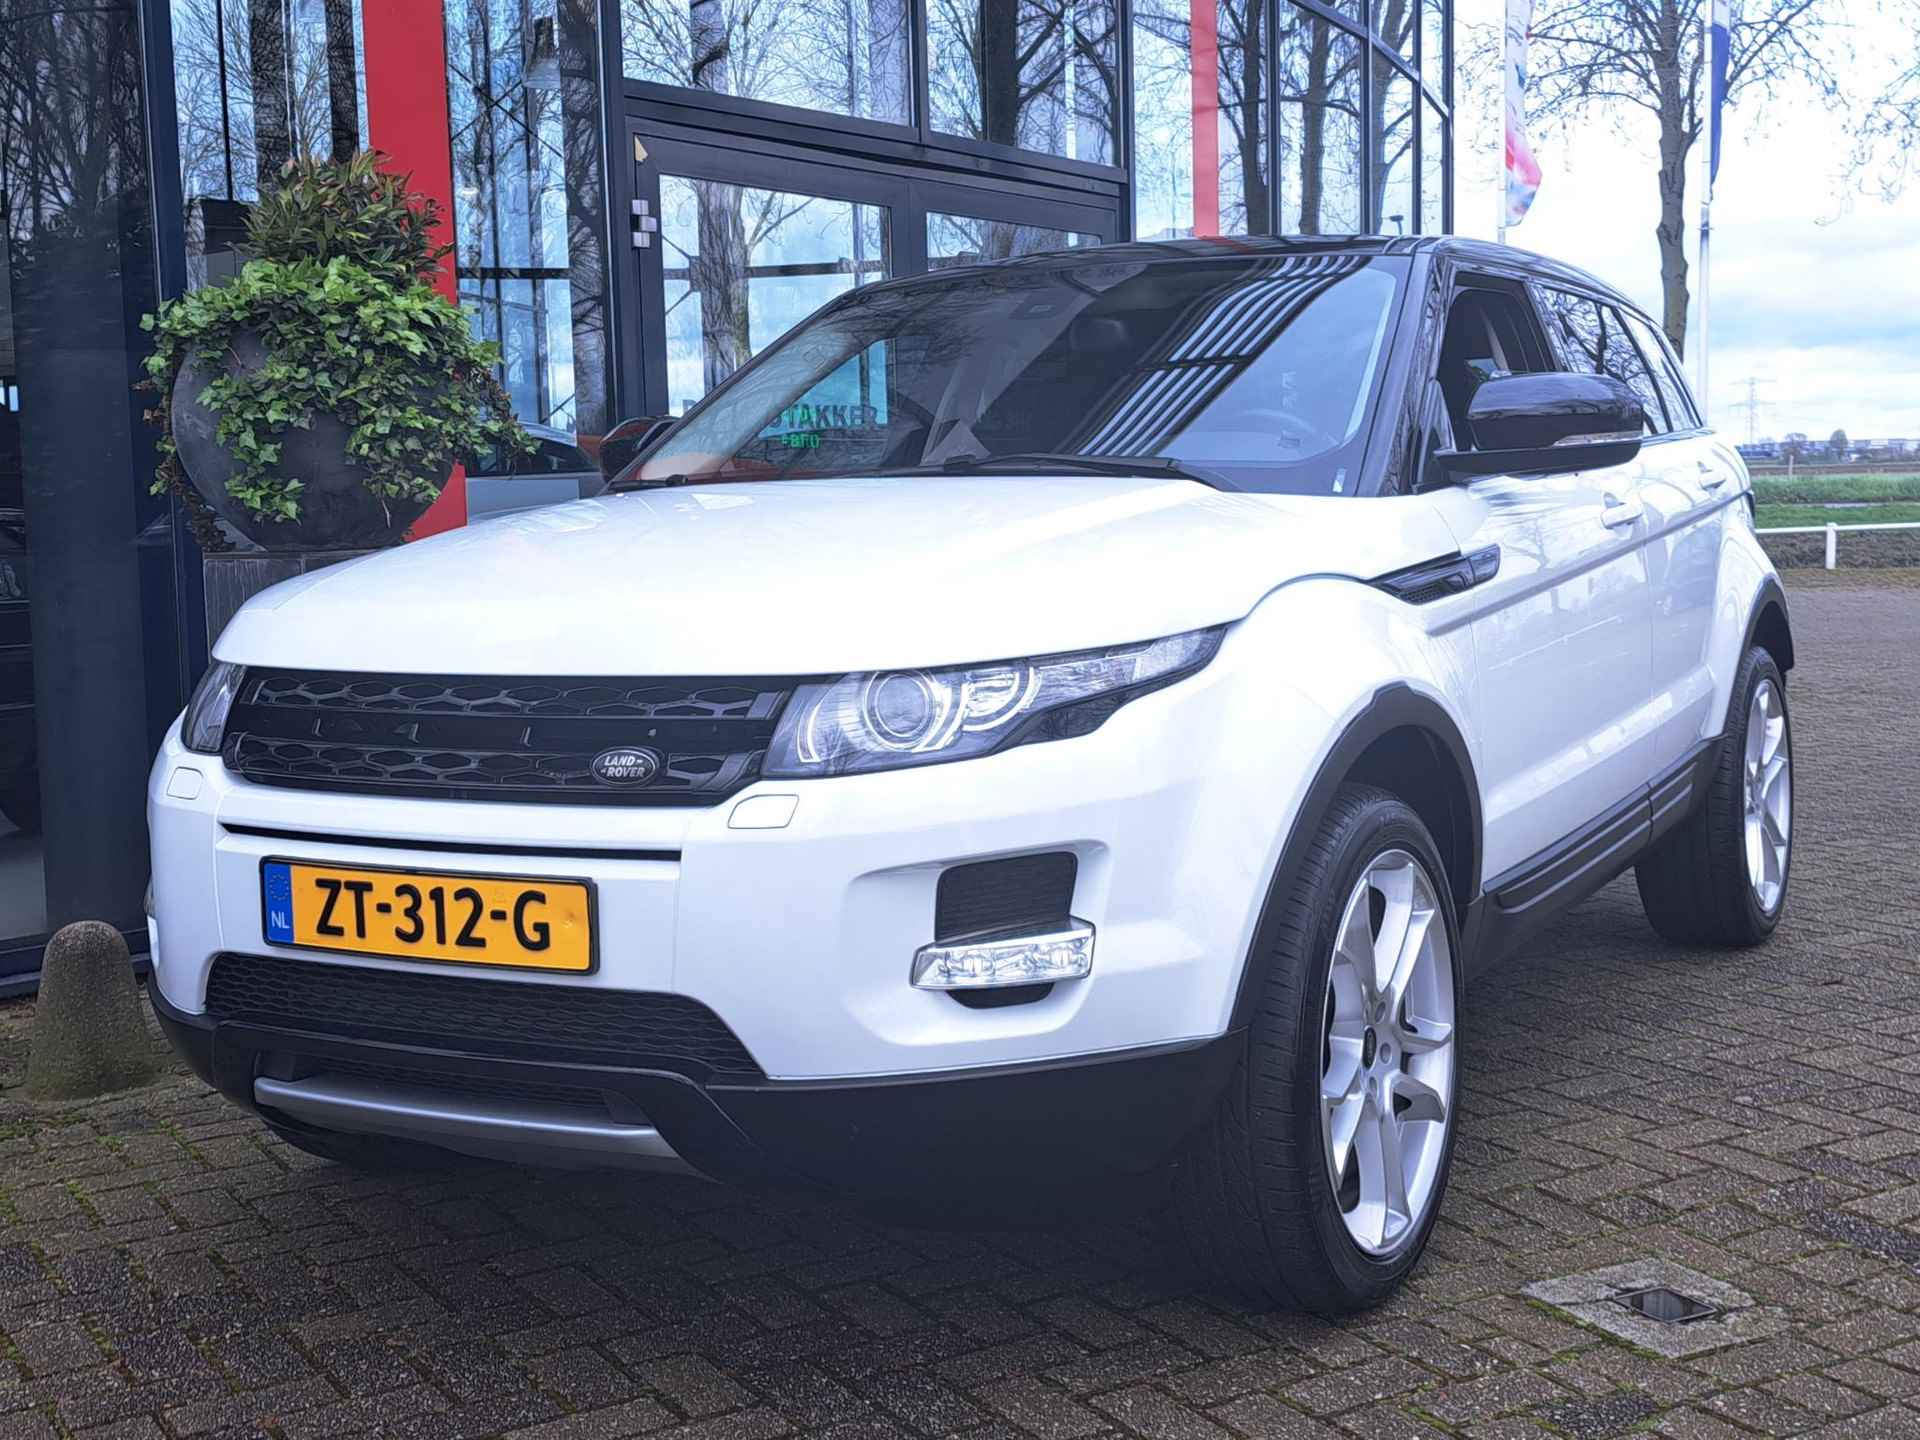 Land Rover Range Rover Evoque 2.0 Si 4WD AUTOMAAT | Airco | LM Velgen | PDC | Cruise Control - 6/23